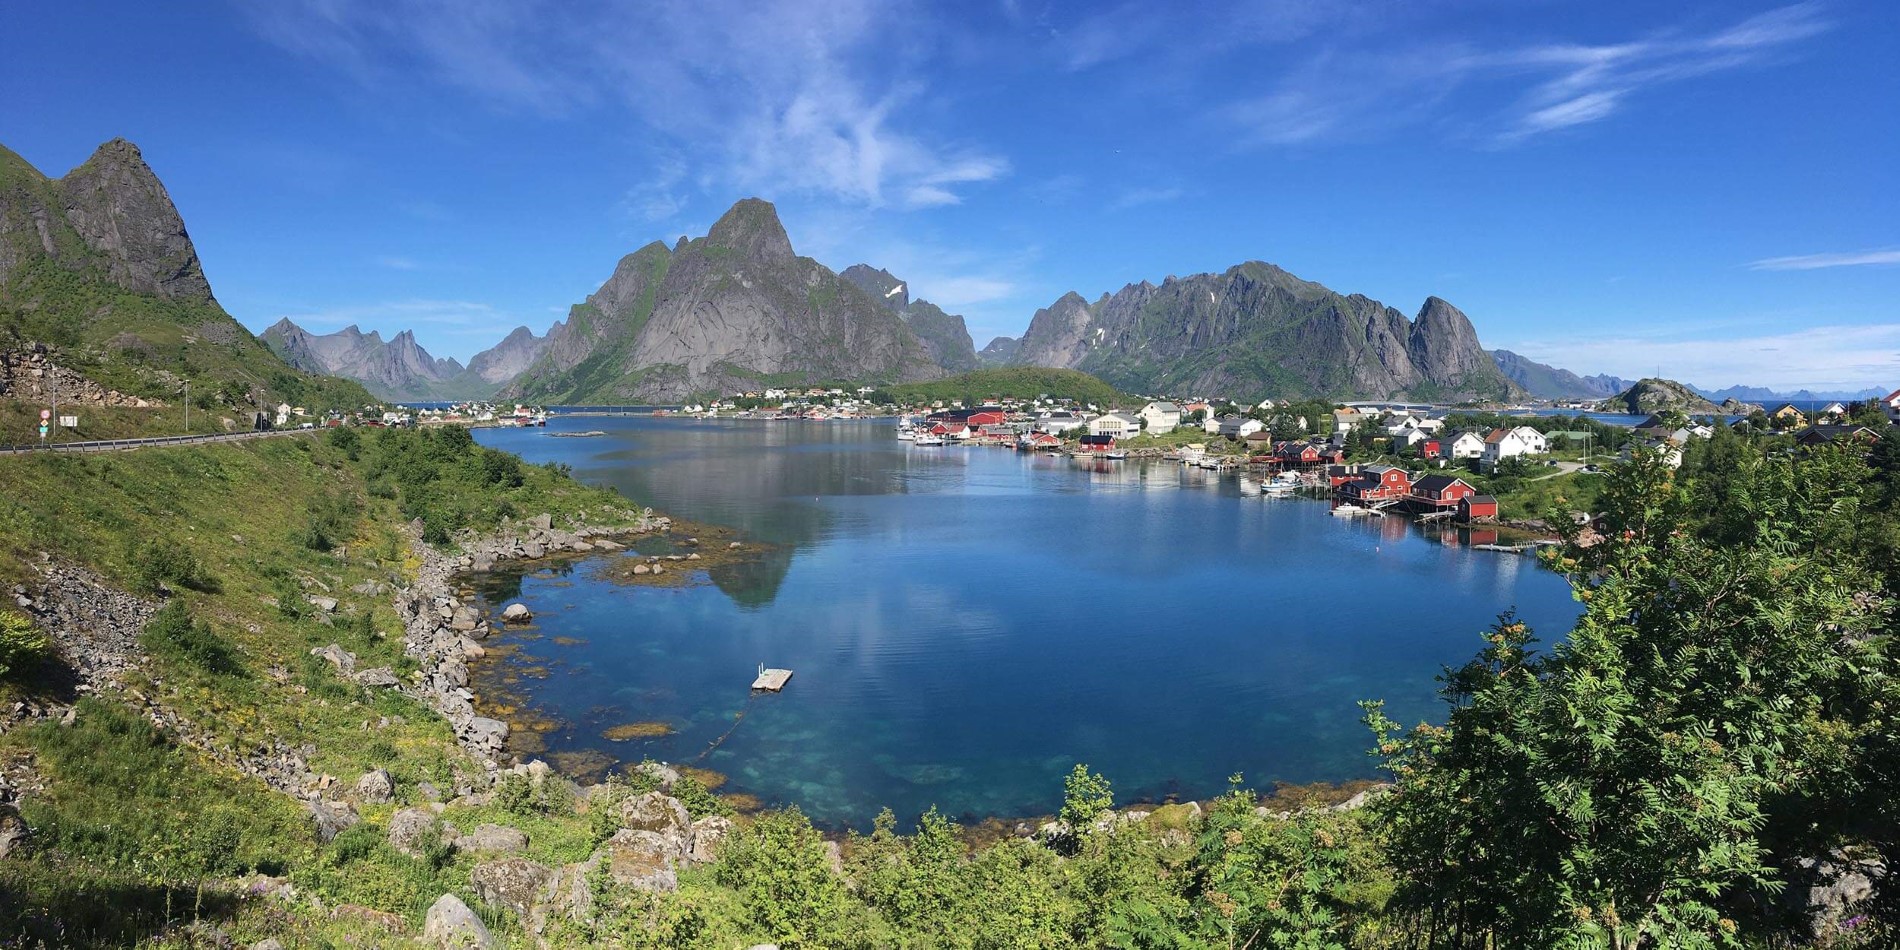 An island in the middle of Lofoten surrounded by a body of water